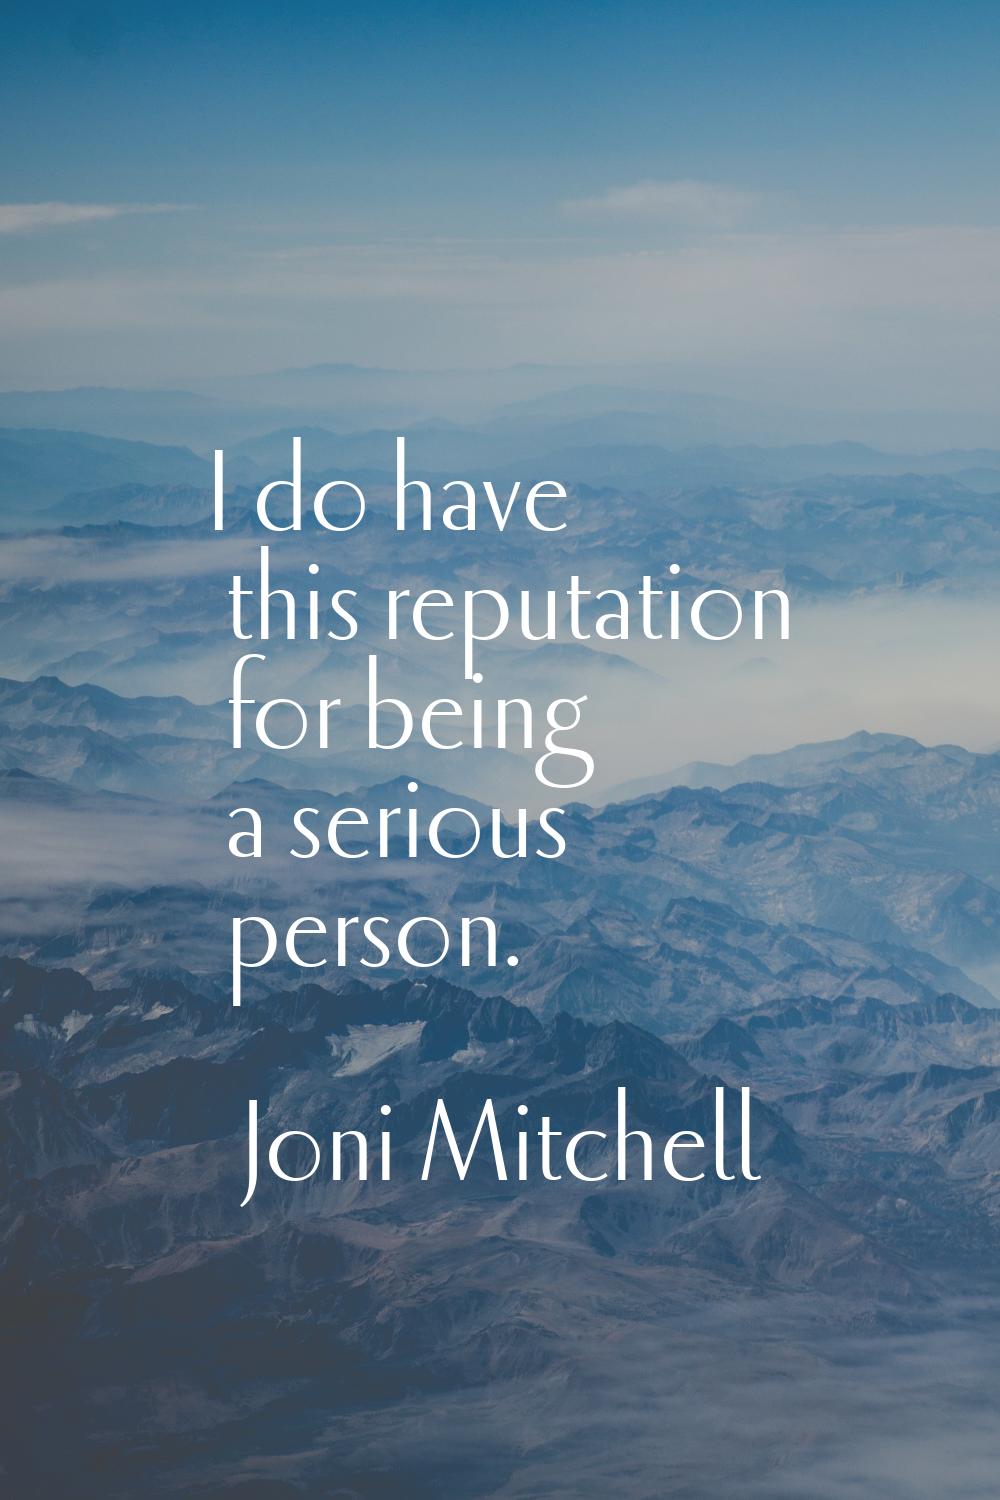 I do have this reputation for being a serious person.